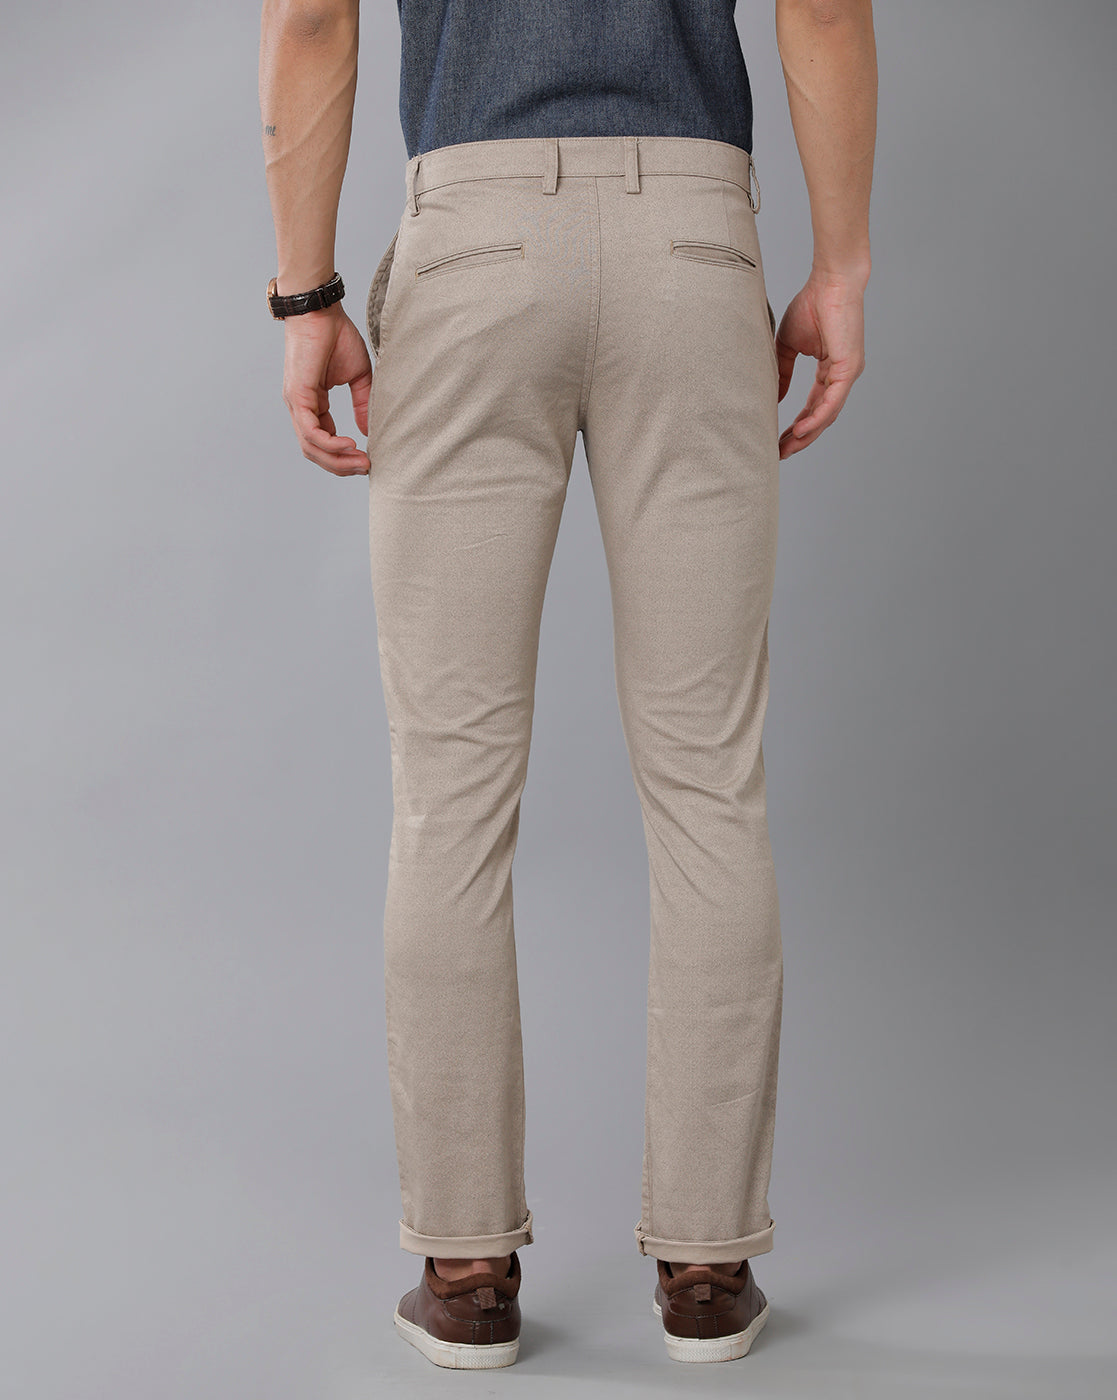 Buy LaMODE Men Cream Coloured Comfort Regular Fit Checked Formal Trousers   Trousers for Men 5531244  Myntra